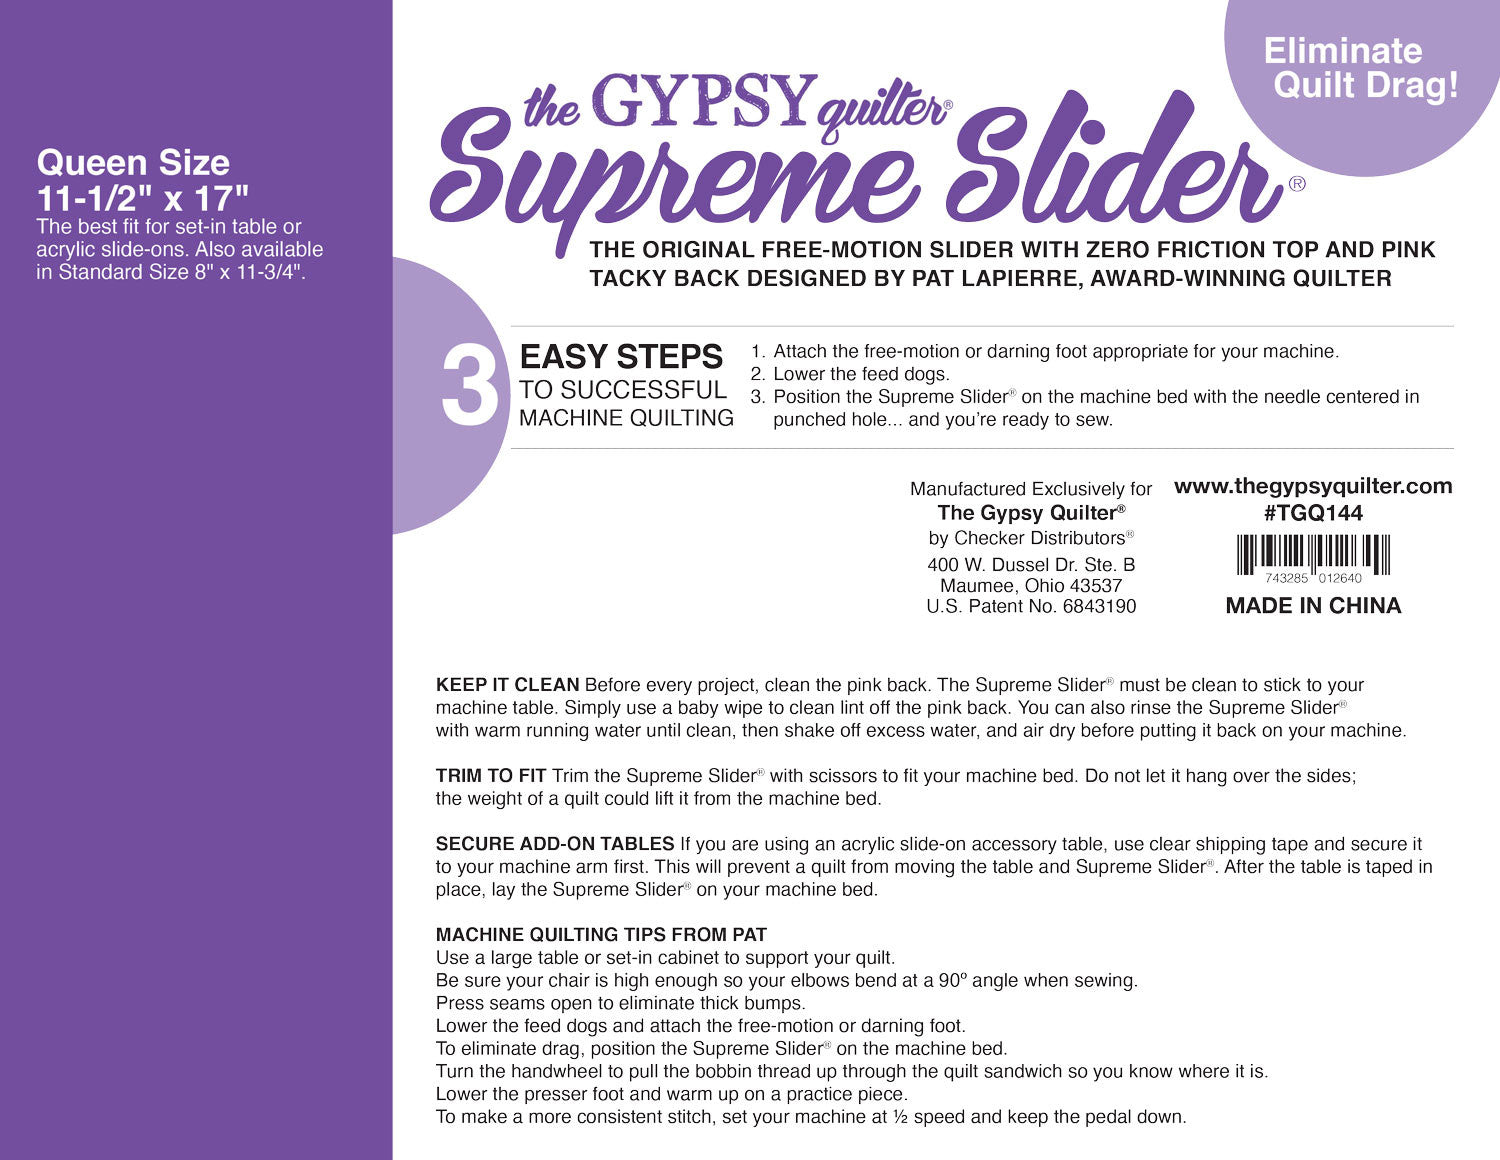 Supreme Slider from The Gypsy Quilter - TGQ144